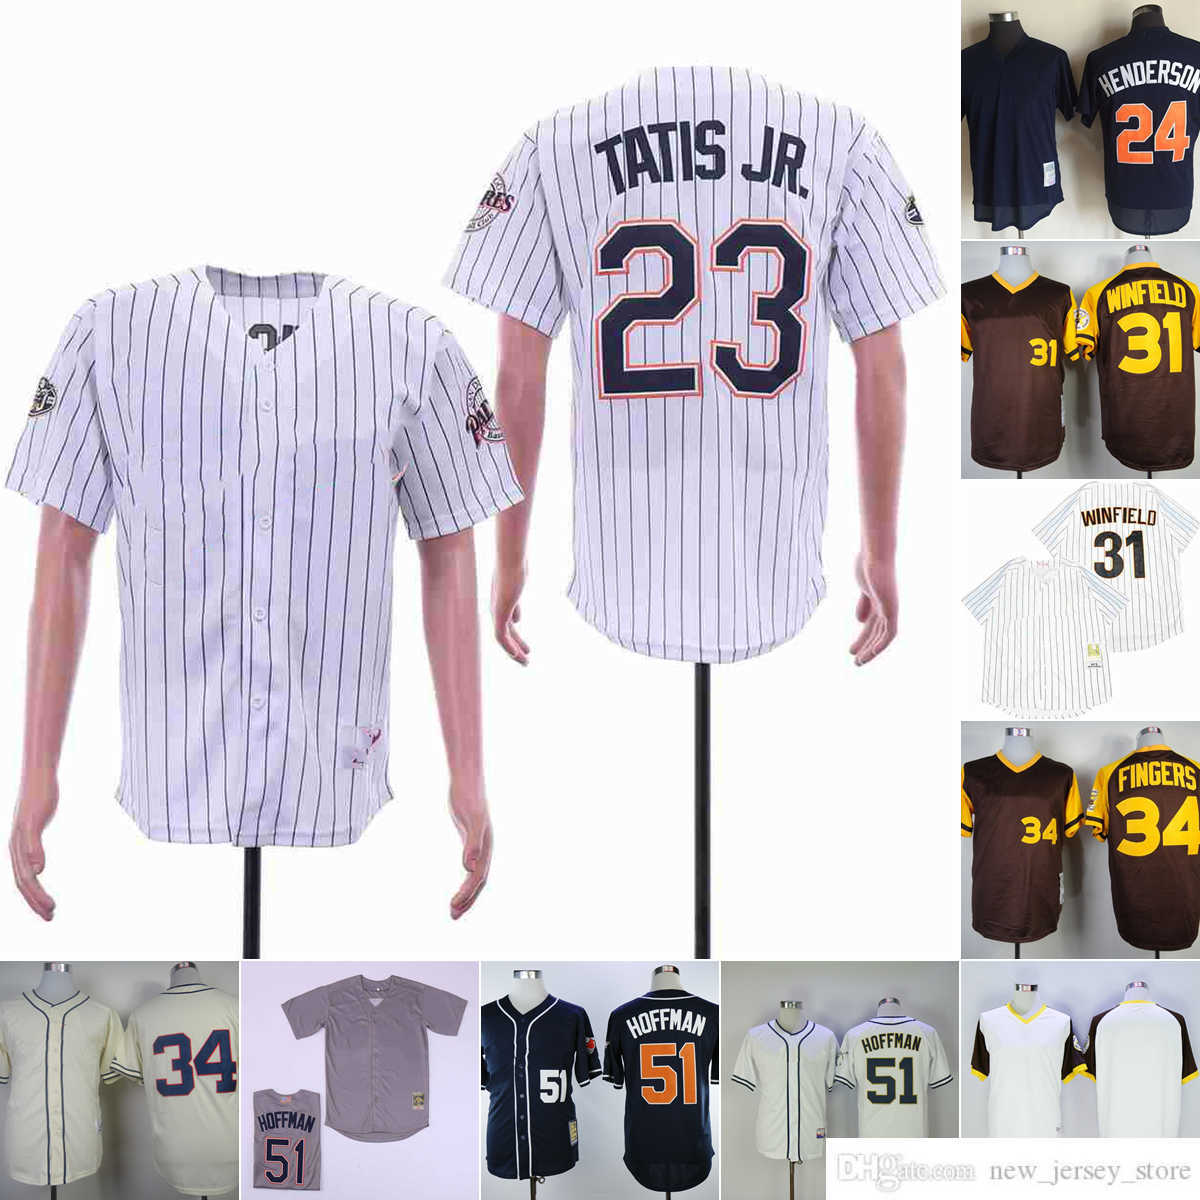 

Movie Mitchell and Ness Baseball 51 Trevor Hoffman Jerseys Vintage Stitched 31 Dave Winfield 34 Rollie Fingers 24 Rickey Henderson 23 Fernando Tatis Jr. Pullover, Vintage (with team name)